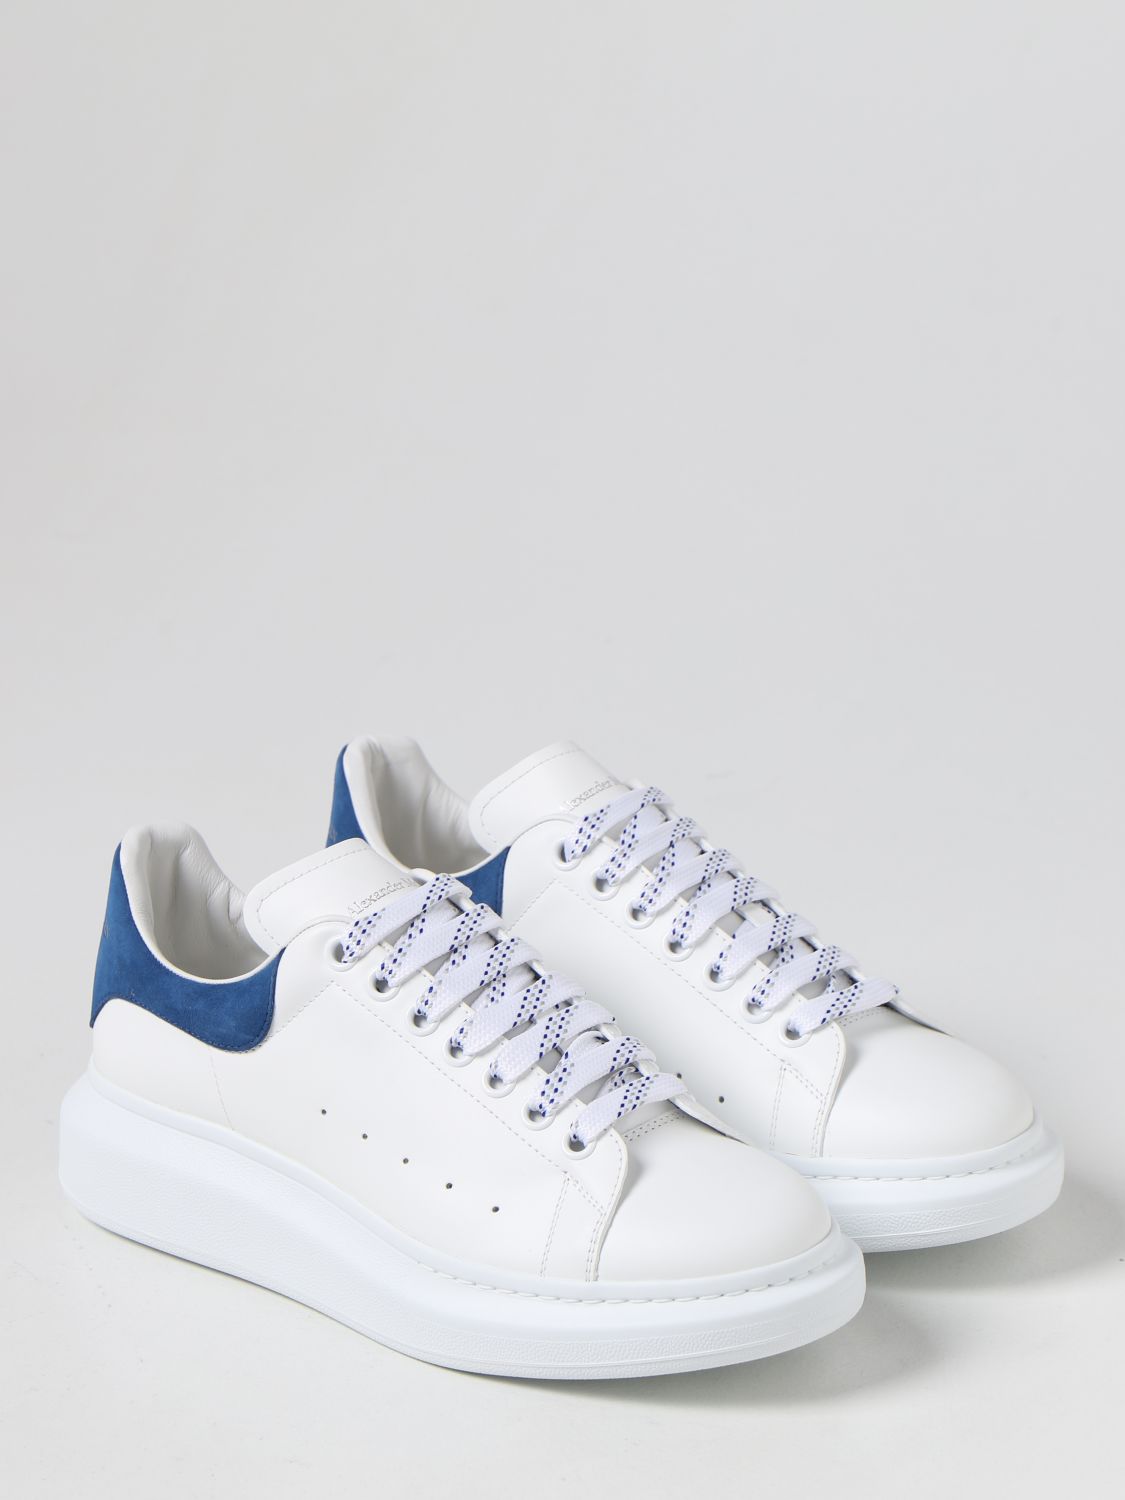 Alexander McQueen - Authenticated Oversize Trainer - Leather Blue Plain for Men, Never Worn, with Tag